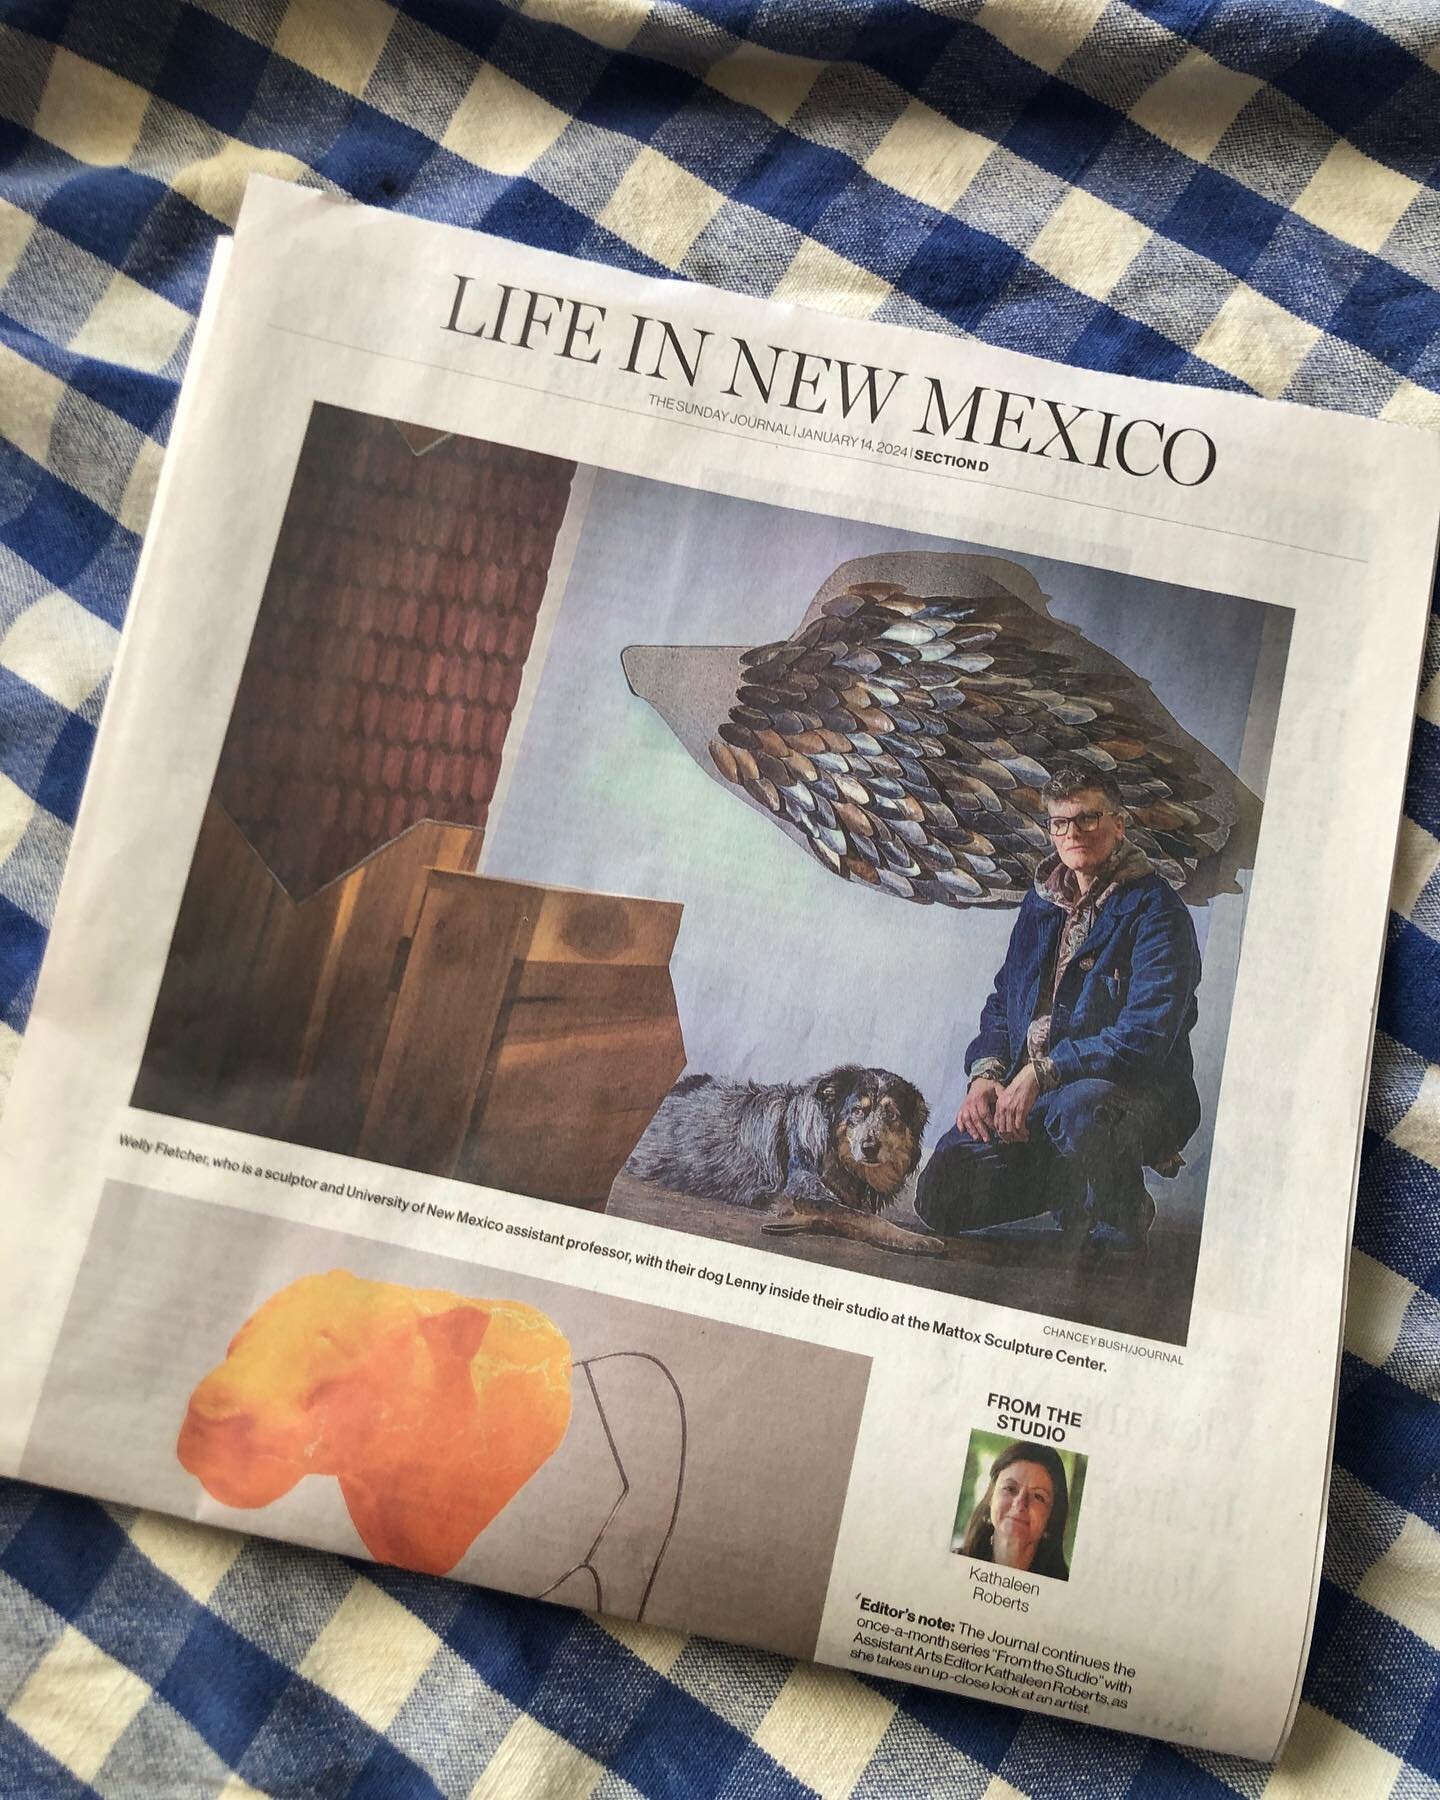 Major thanks to Kathaleen Roberts ✍️ and Chauncey Bush 📸 and @abqjournal for this sweet profile of me, Lenny 🐾, and my prehistoric action figures in the Sunday paper. 
⚡️📰👀⚡️
Such a treat to have my work, process, and studio featured - it means a